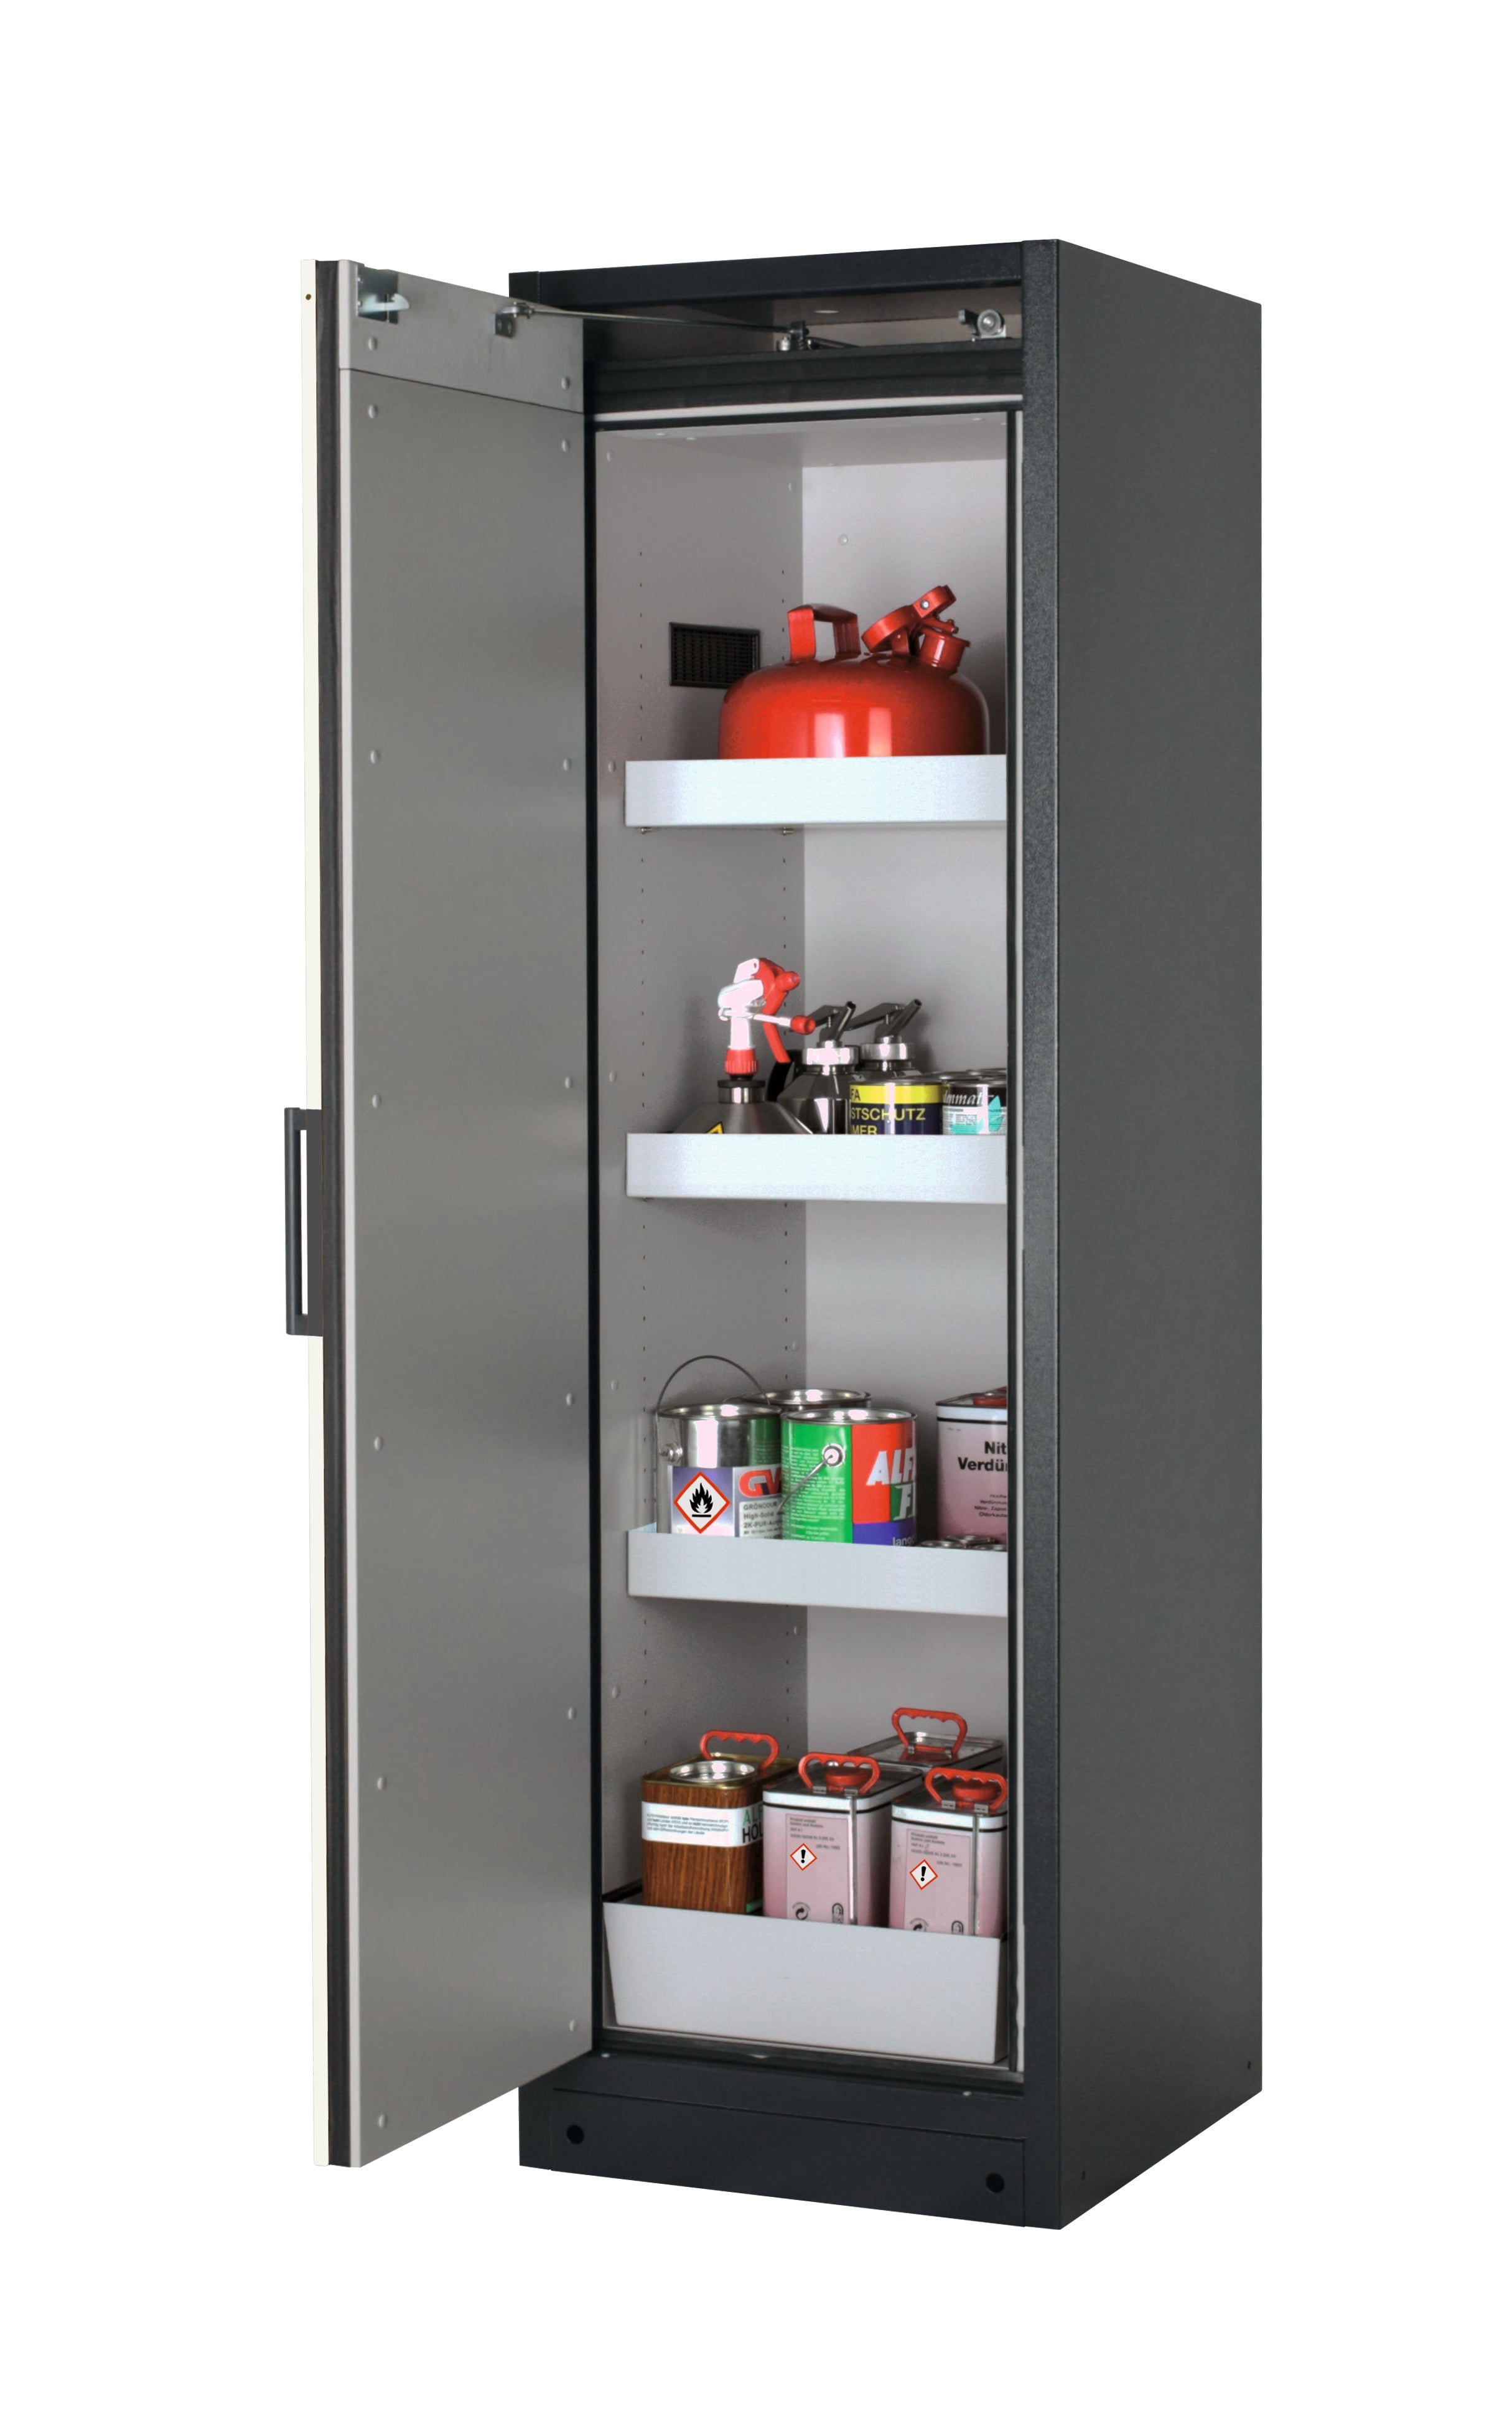 Type 90 safety storage cabinet Q-PEGASUS-90 model Q90.195.060.WDAC in asecos silver with 3x tray shelf (standard) (sheet steel),